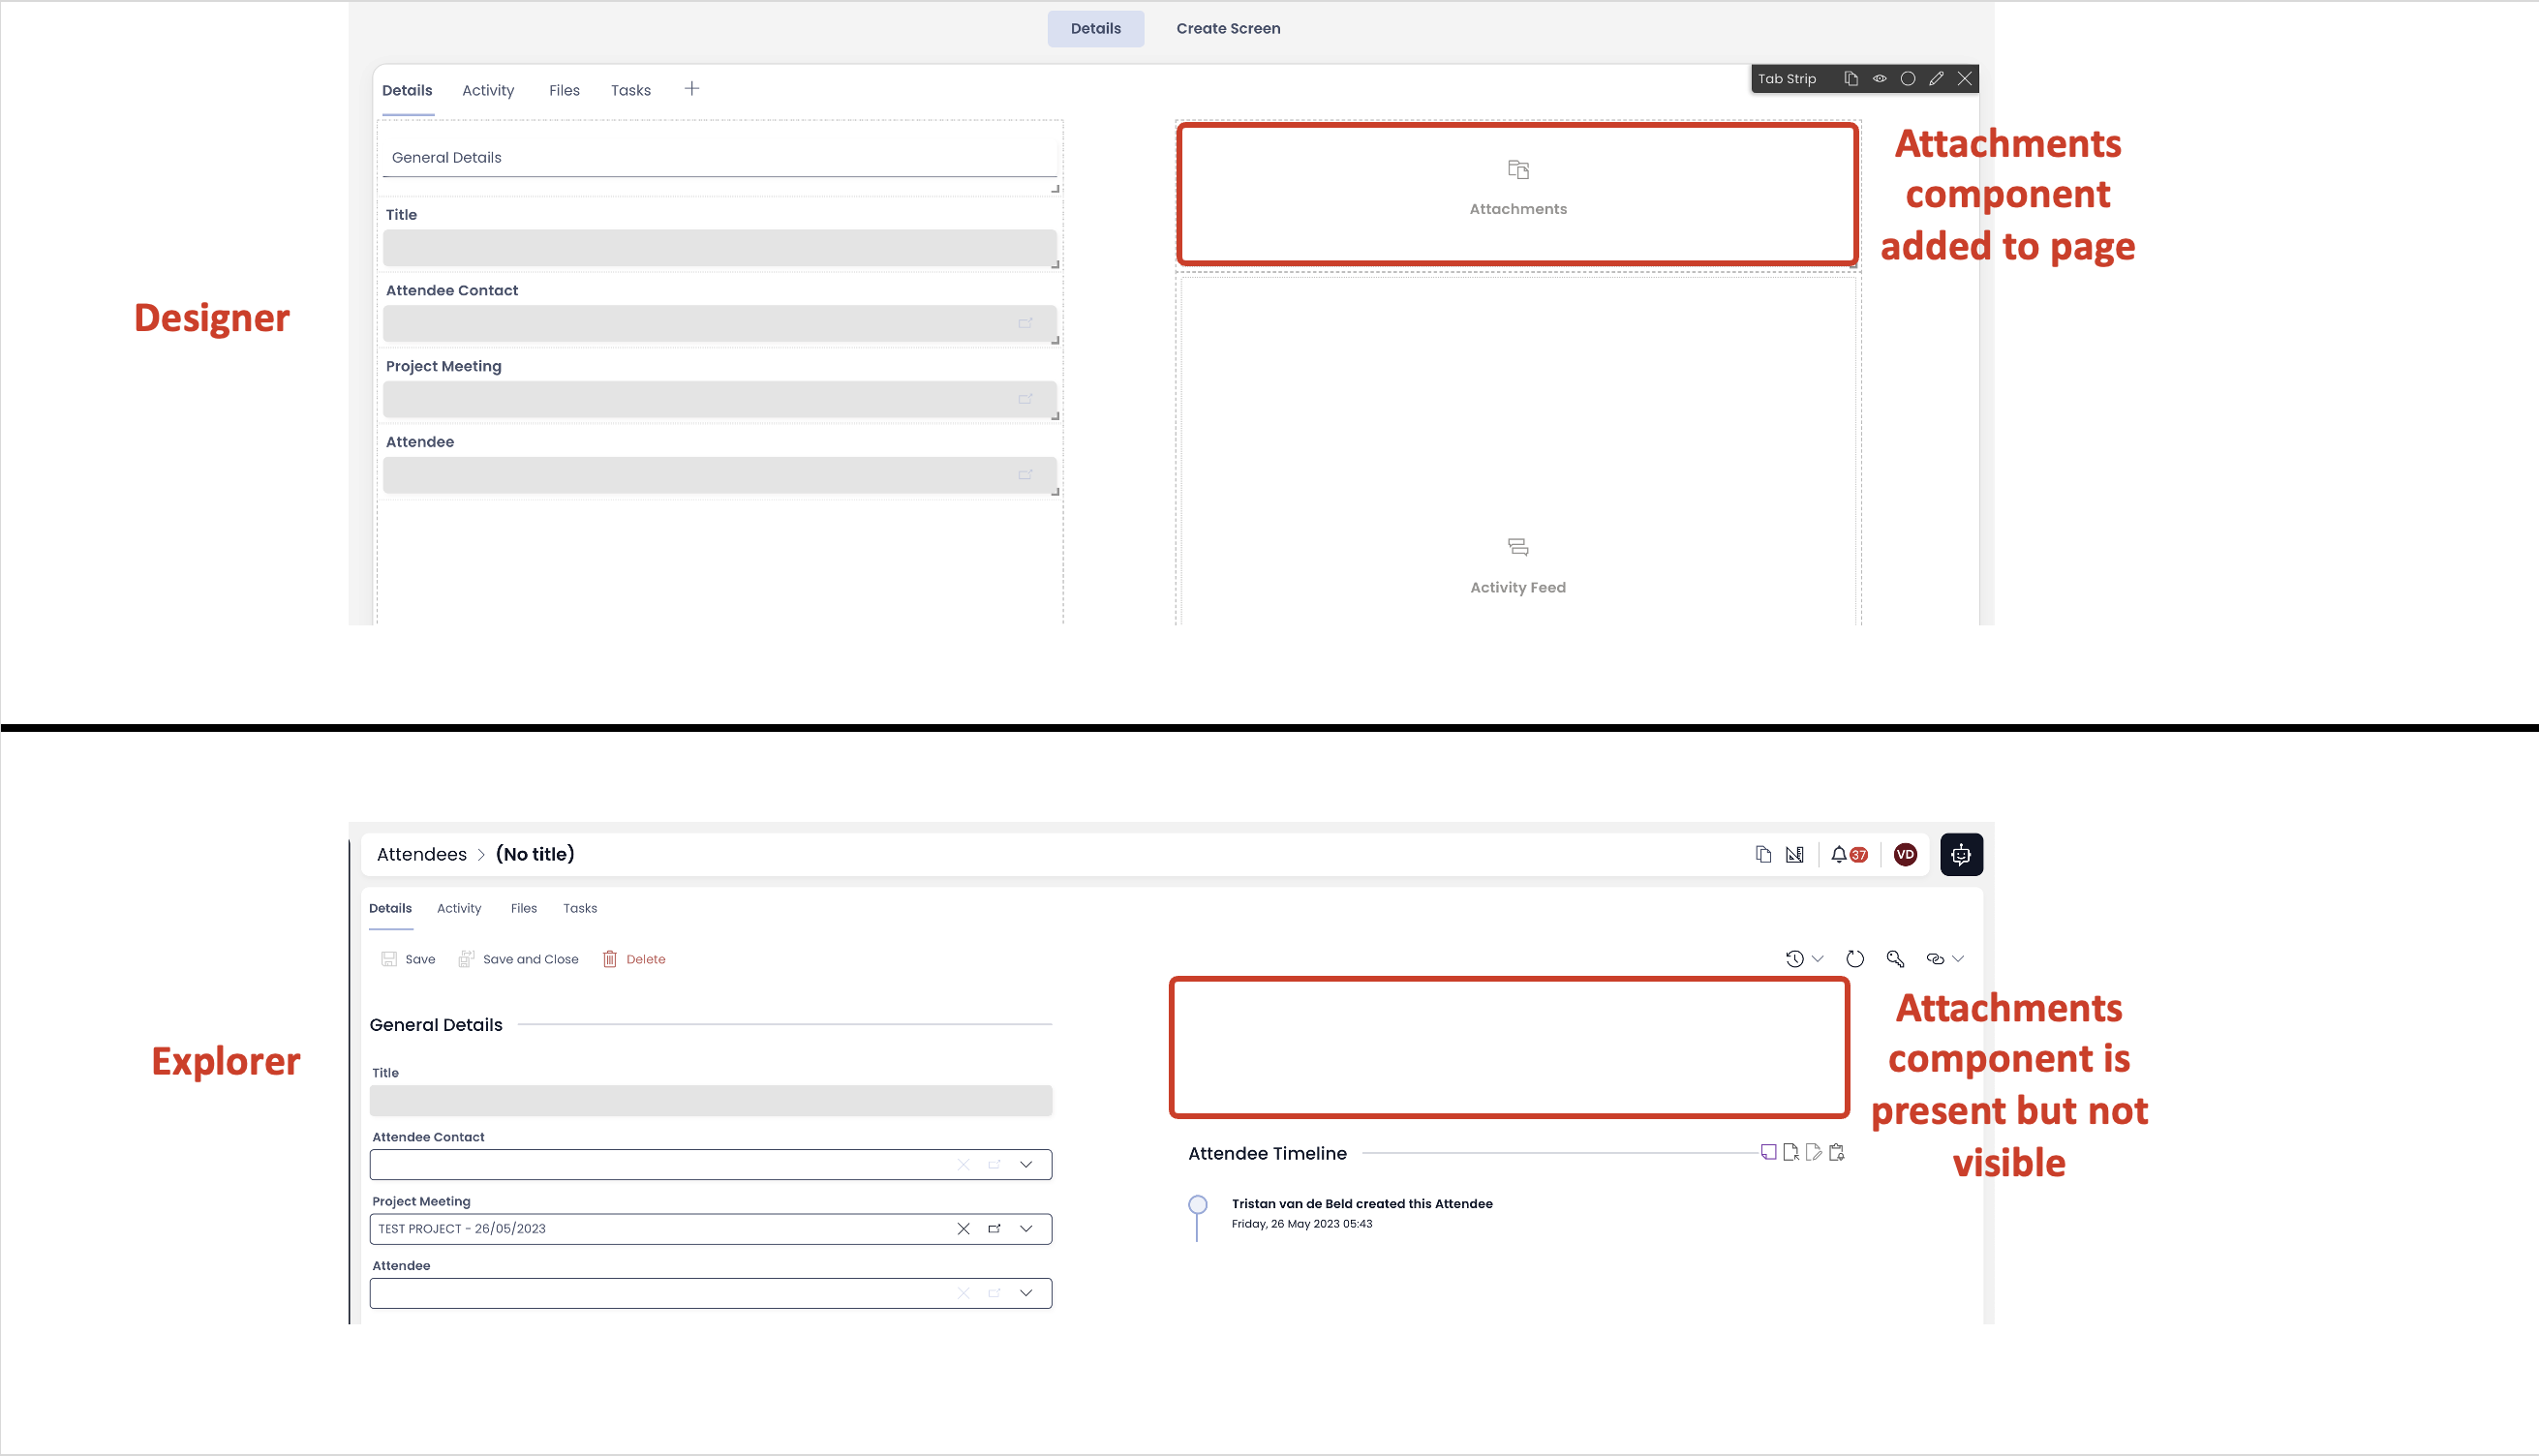 Image showing Attachment component added in Designer but not visible in Explorer